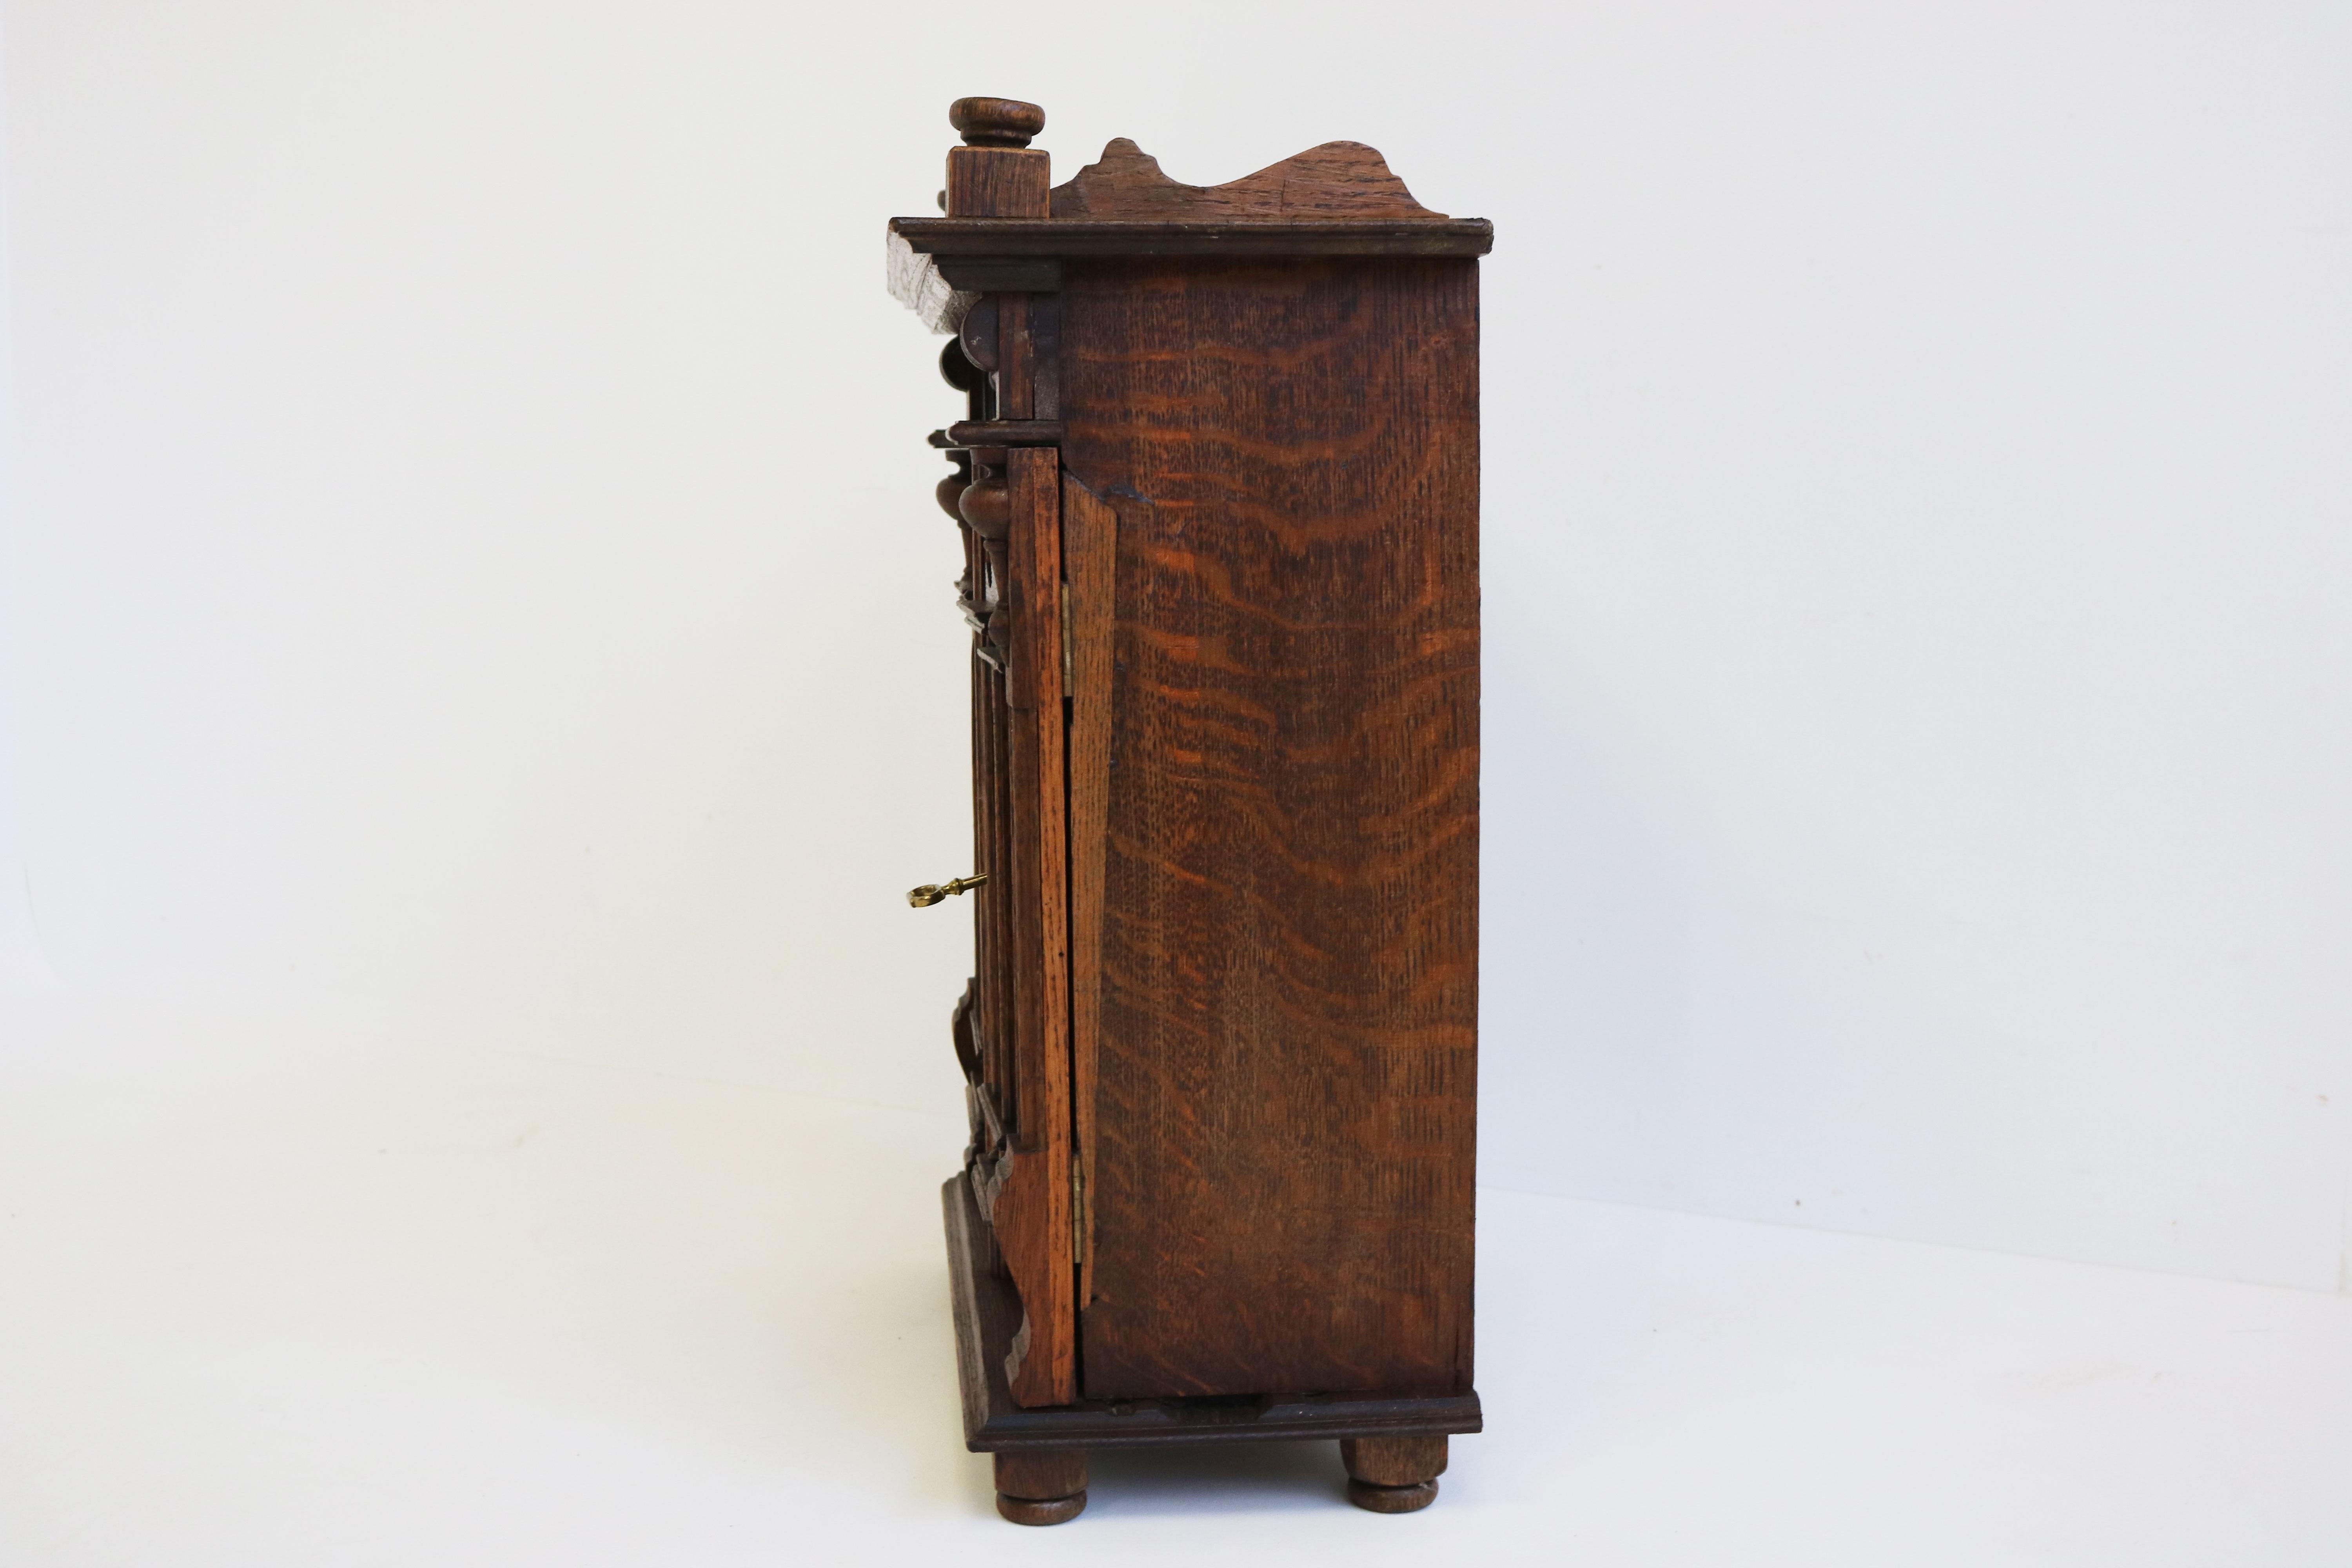 Neoclassical Revival Antique 19th Century Neoclassical Wall Cabinet / Small Cabinet Carved Oak For Sale